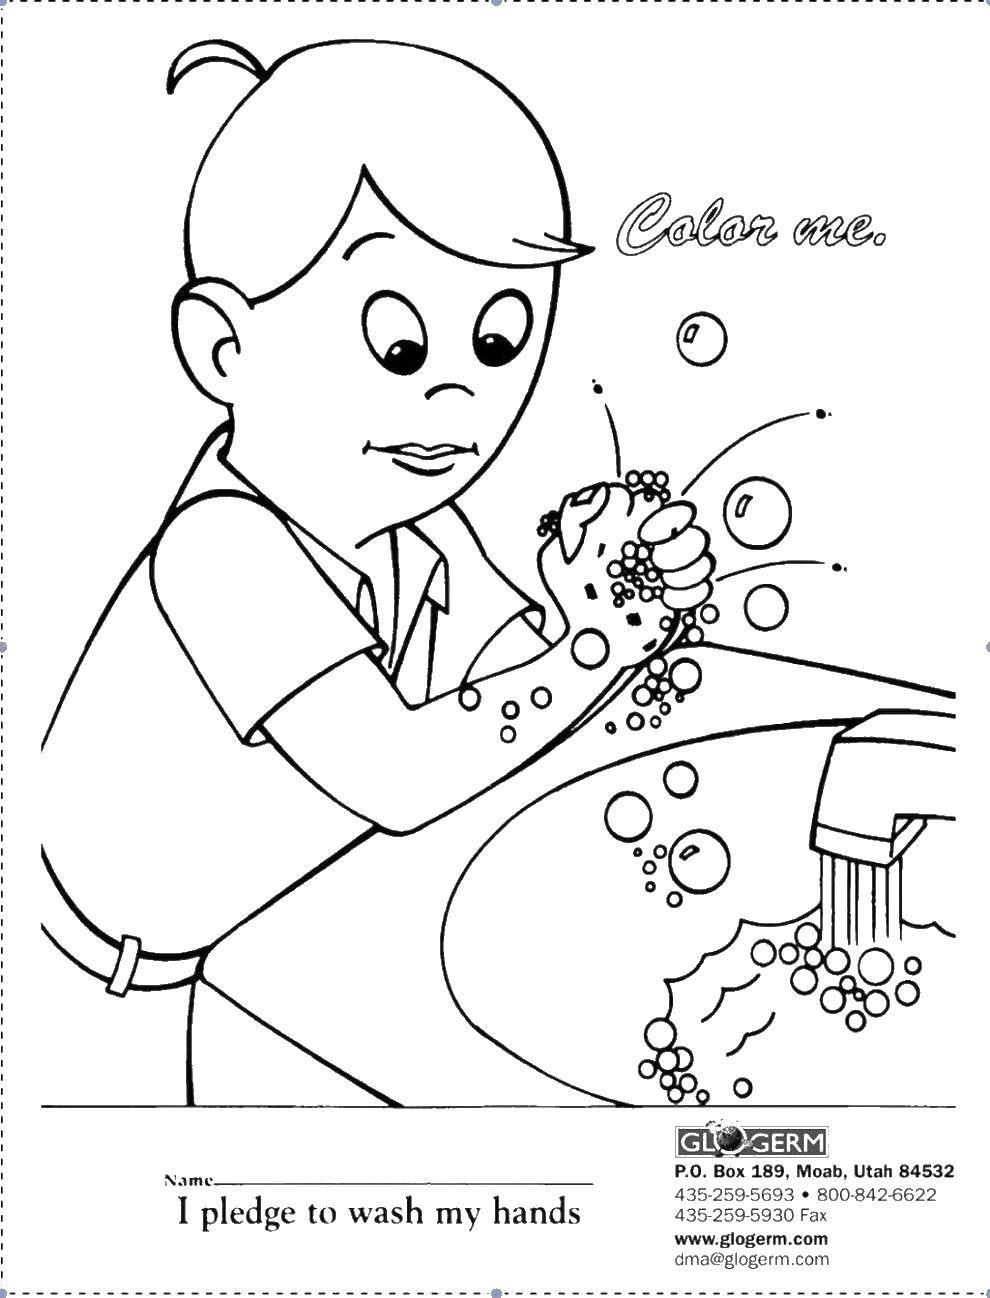 Coloring A boy washes his hands. Category coloring. Tags:  germs, bacteria, hand washing.